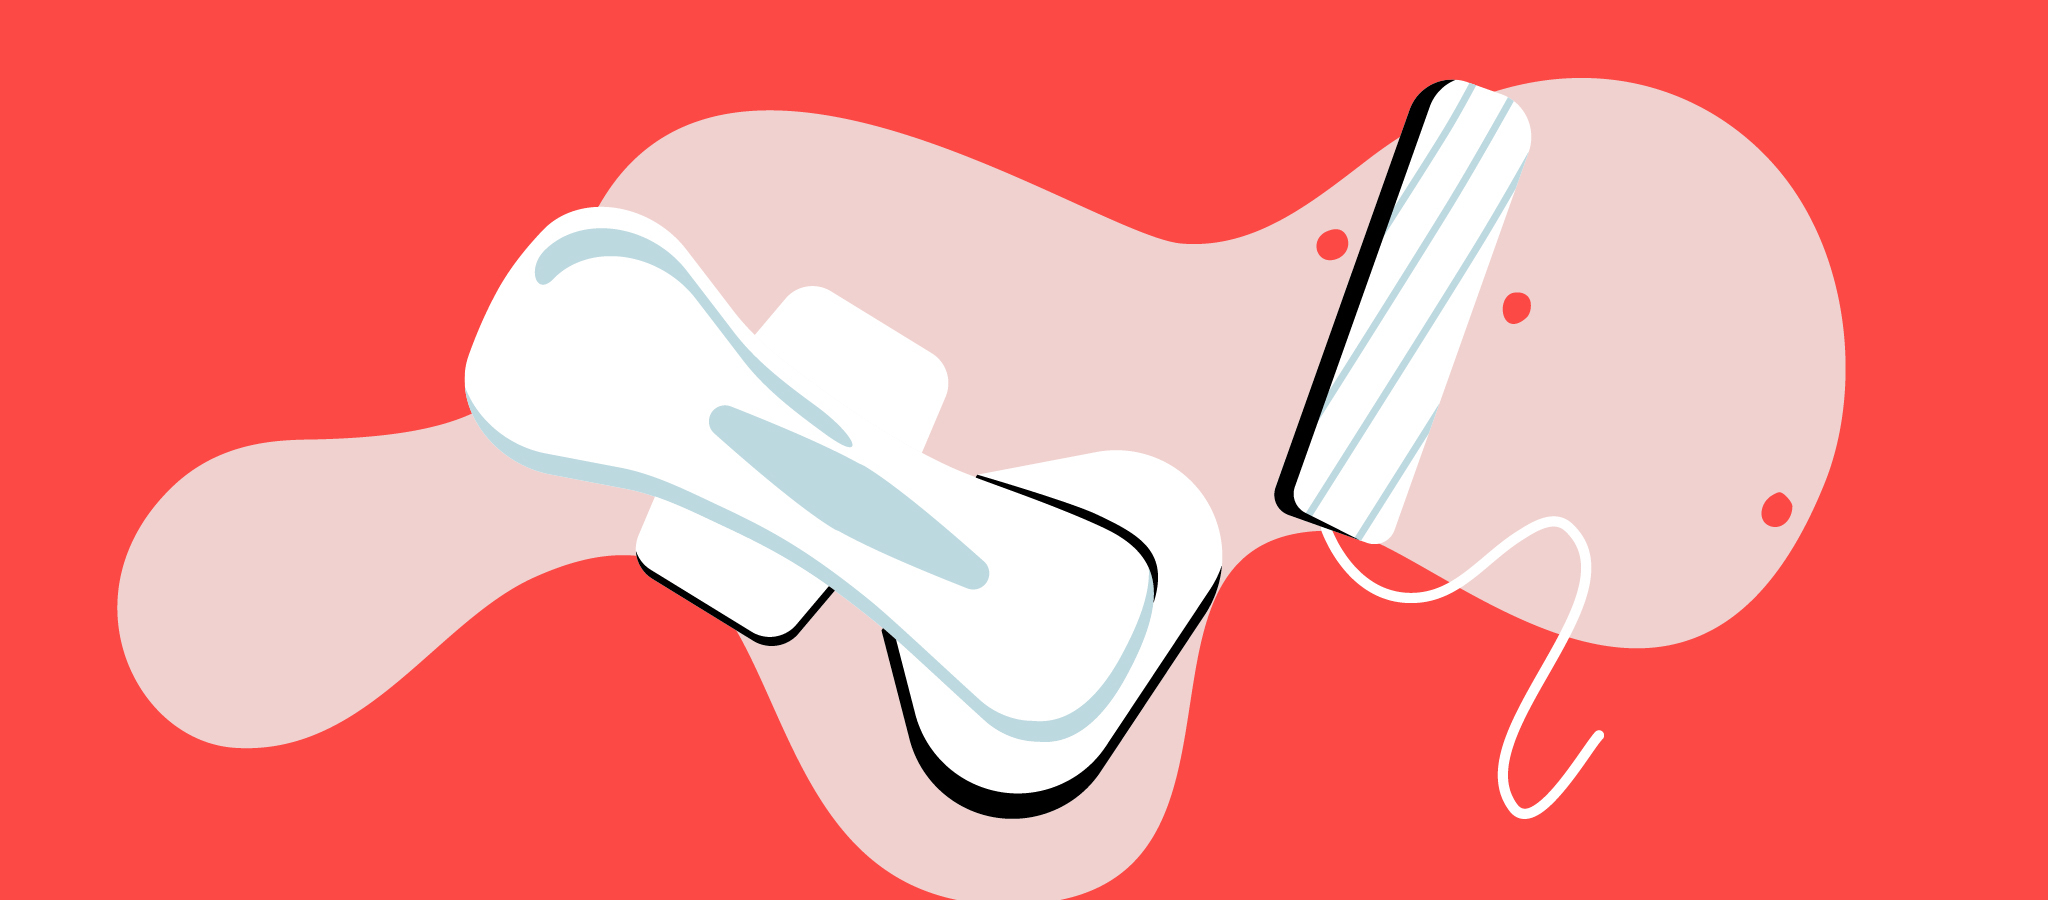 Menstrual Emergencies: Alternative to Pads & Tampons in Extreme